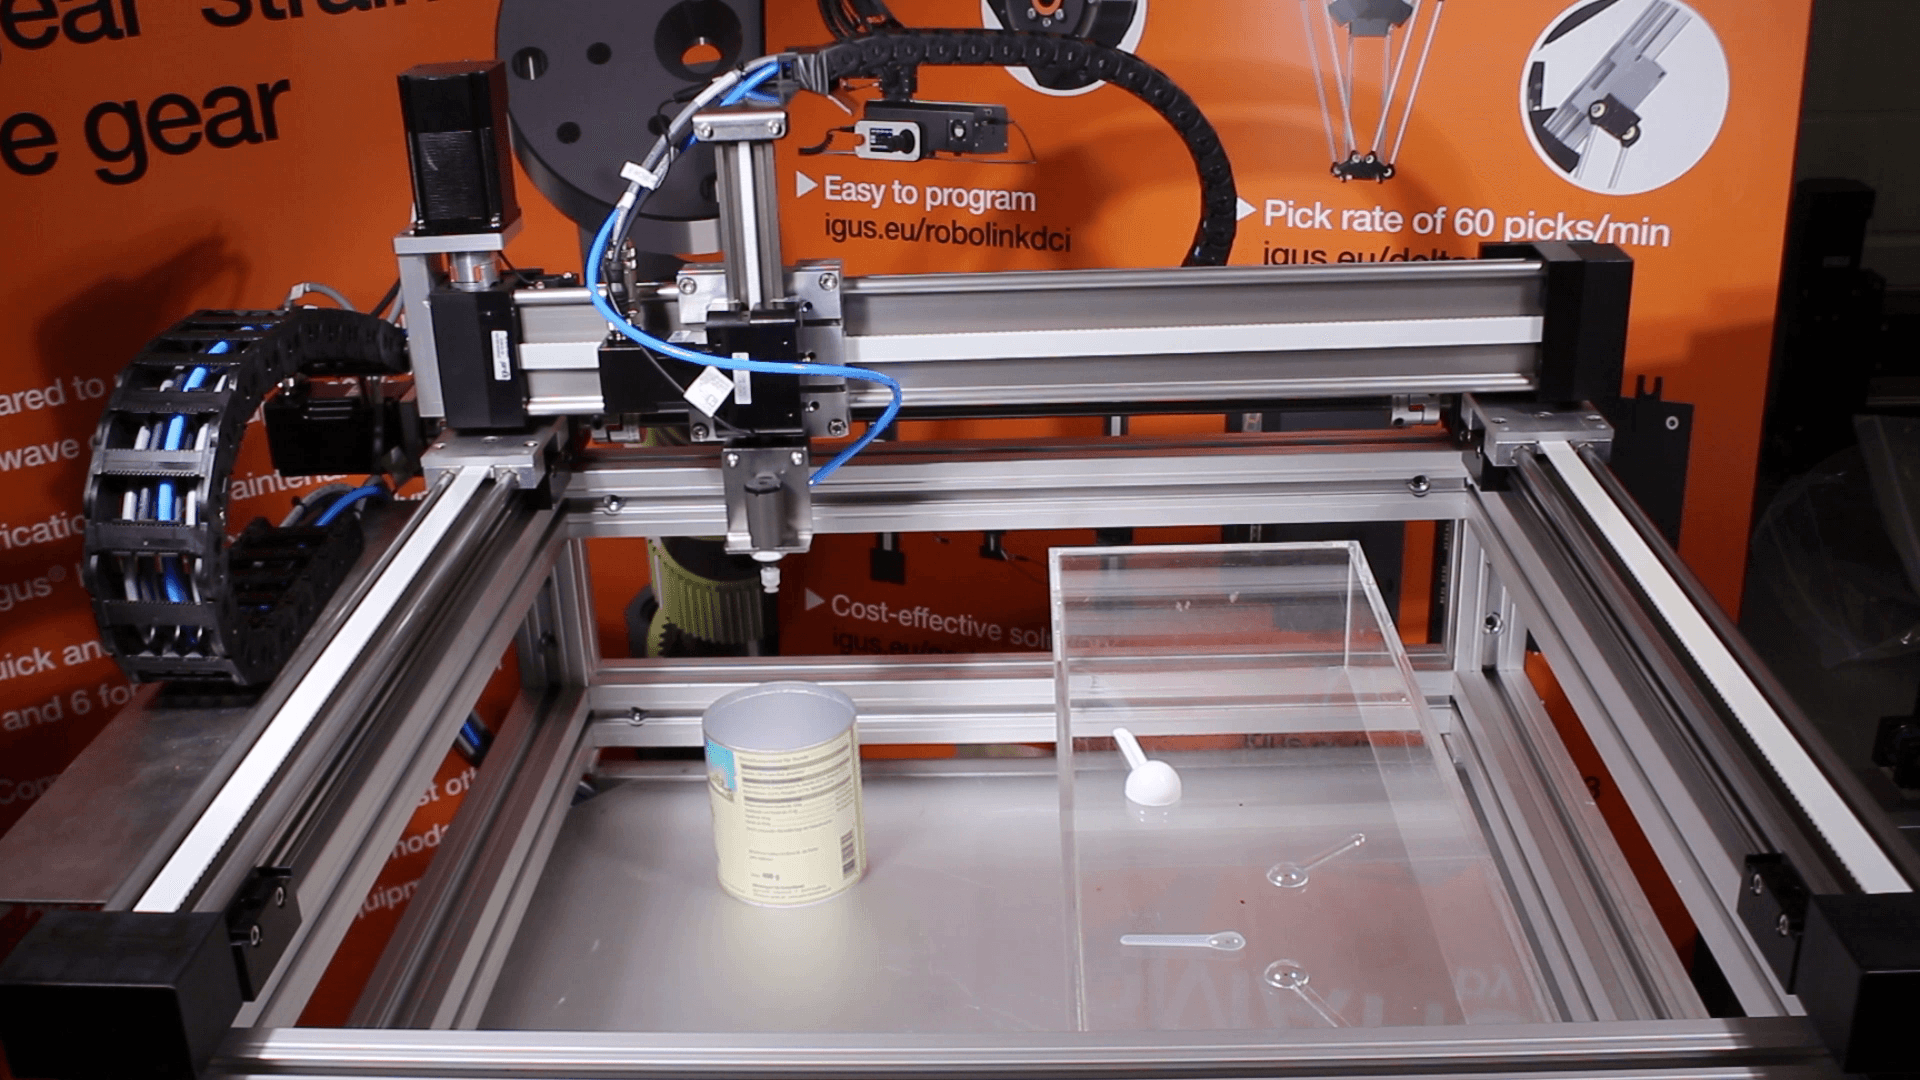 Pick and place with small gantry robot